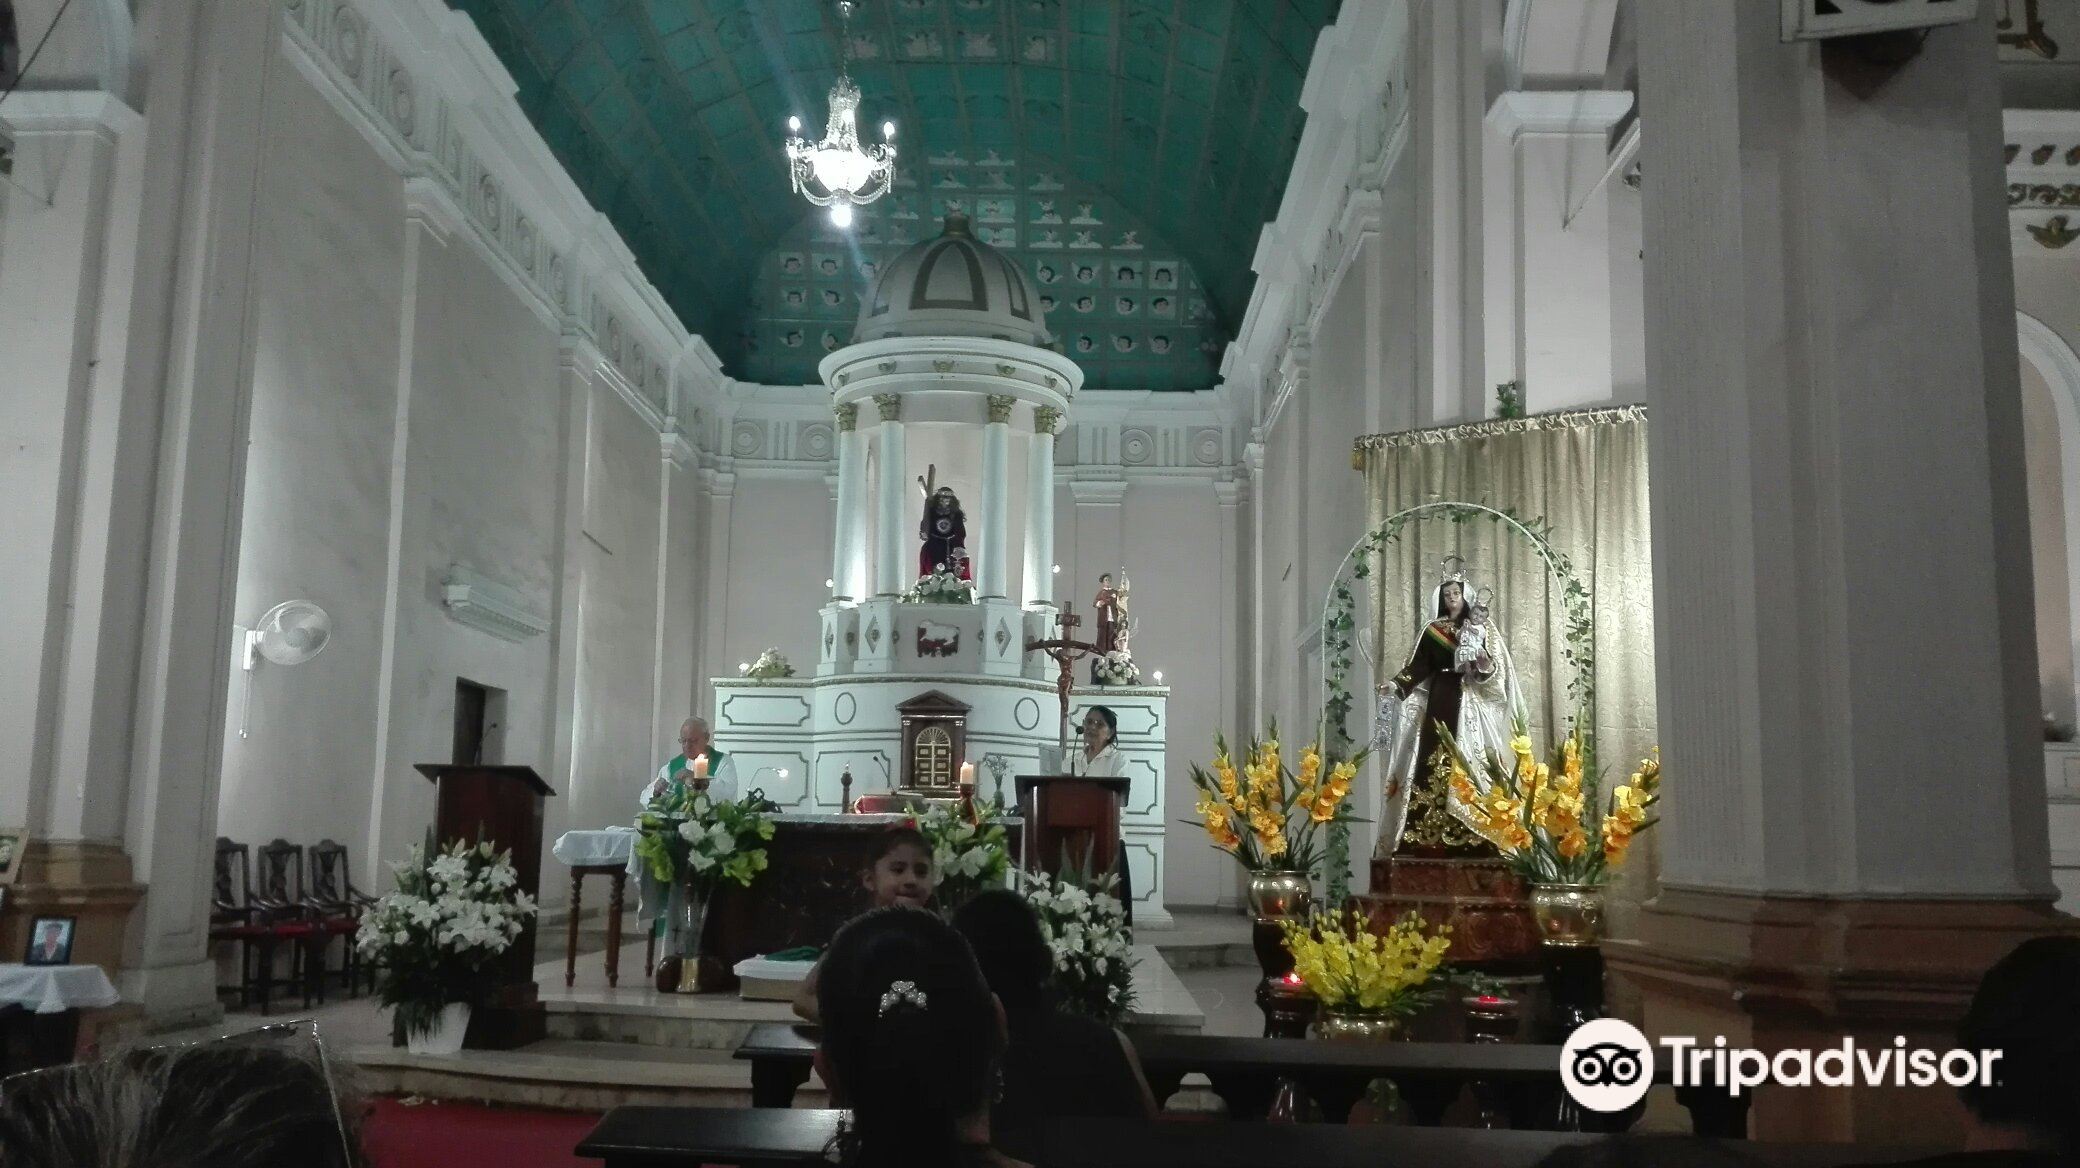 Iglesia de Jesus Nazareno attraction reviews - Iglesia de Jesus Nazareno  tickets - Iglesia de Jesus Nazareno discounts - Iglesia de Jesus Nazareno  transportation, address, opening hours - attractions, hotels, and food